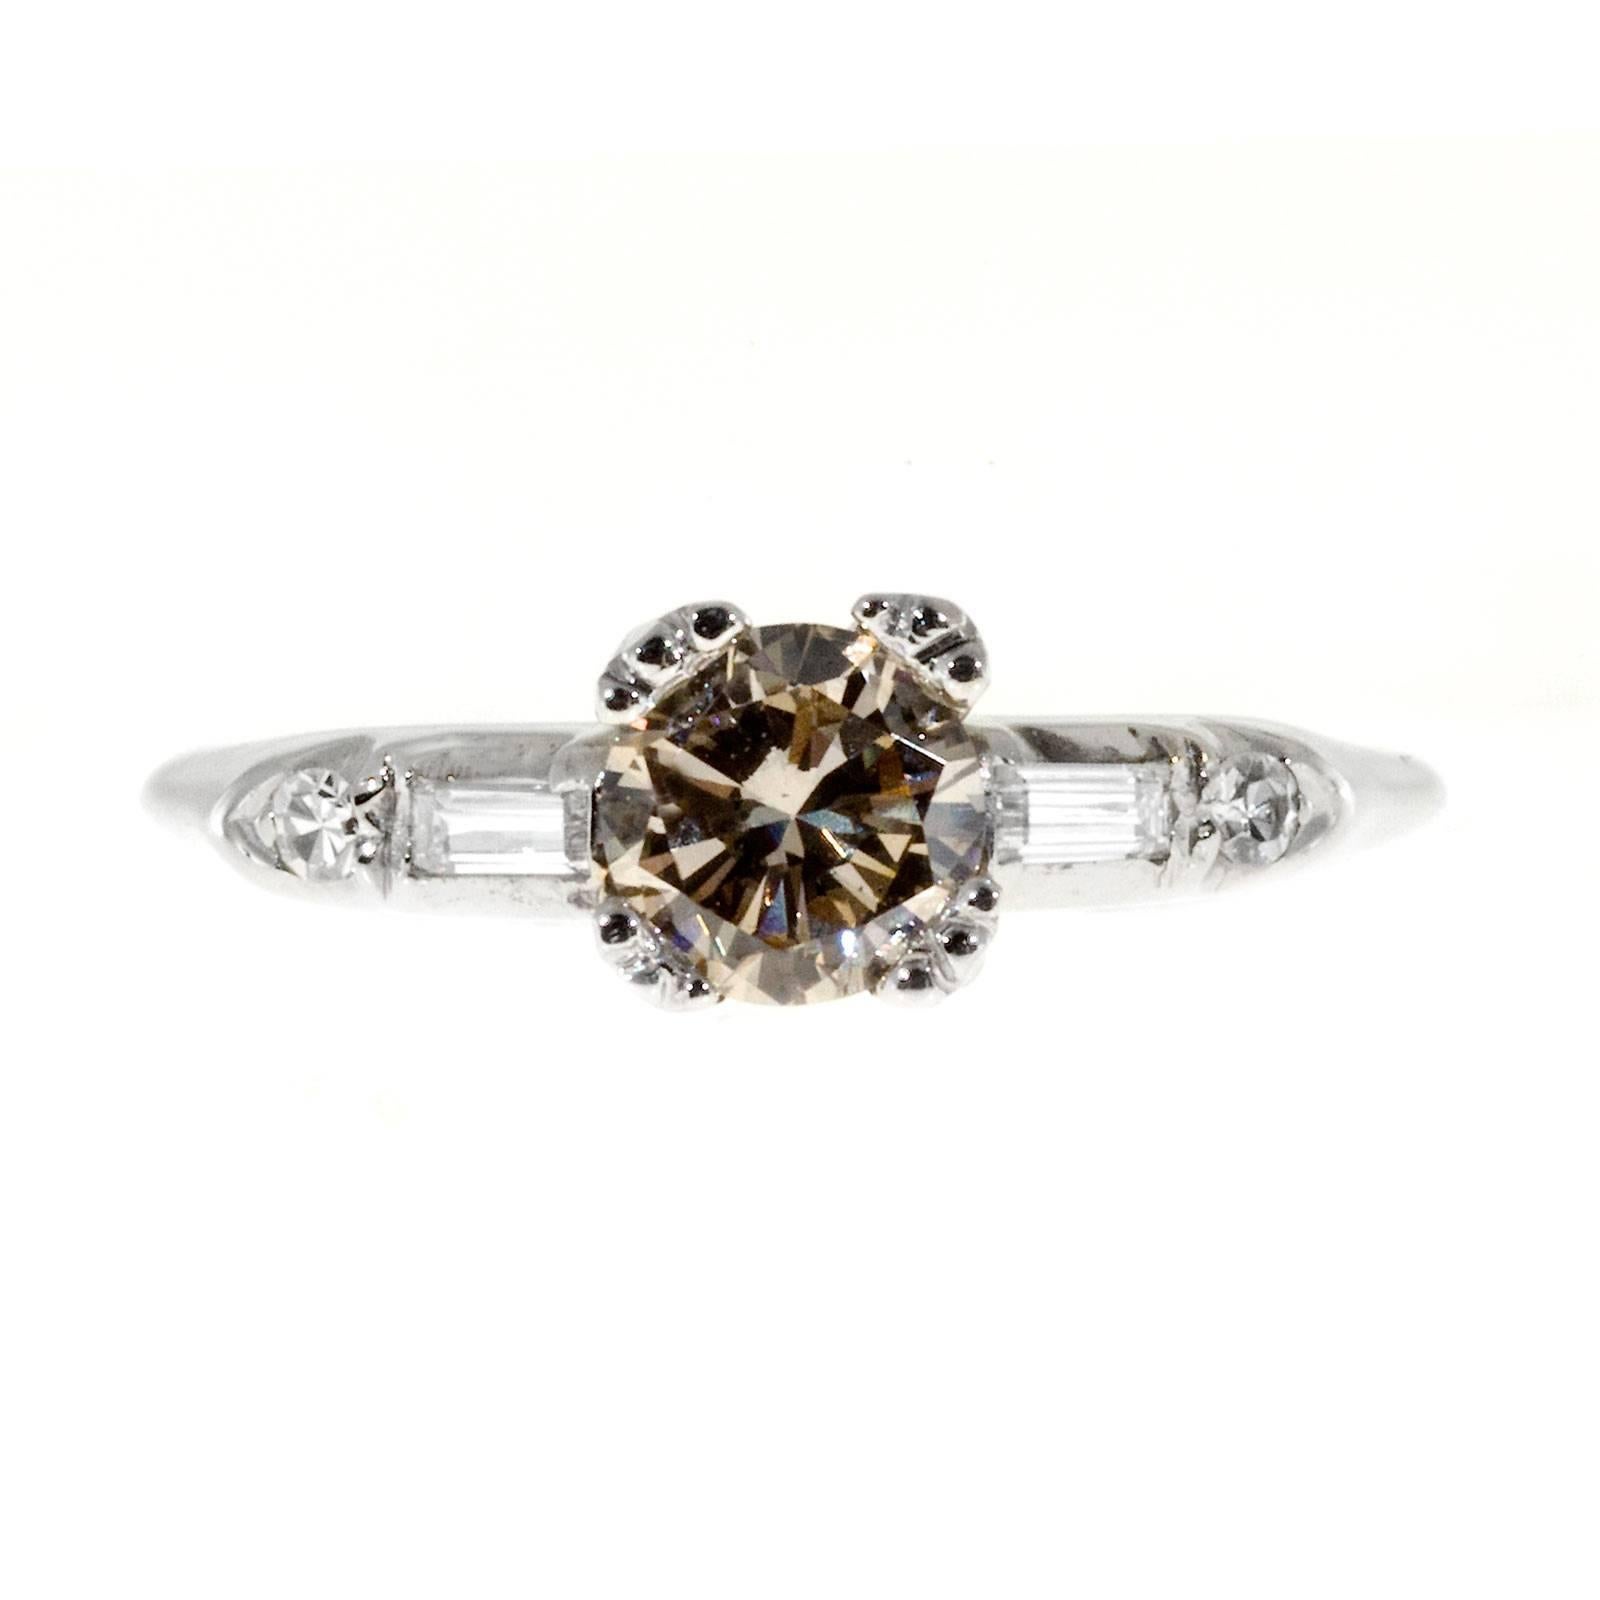 18k white gold late Art Deco engagement ring with a genuine certified light brown diamond with a hint of pink. Circa 1930-1939.

1 GIA certified #1122987883 light brown diamond approx. total weight .60cts, W to X range.SI2 eye clean, slight pink